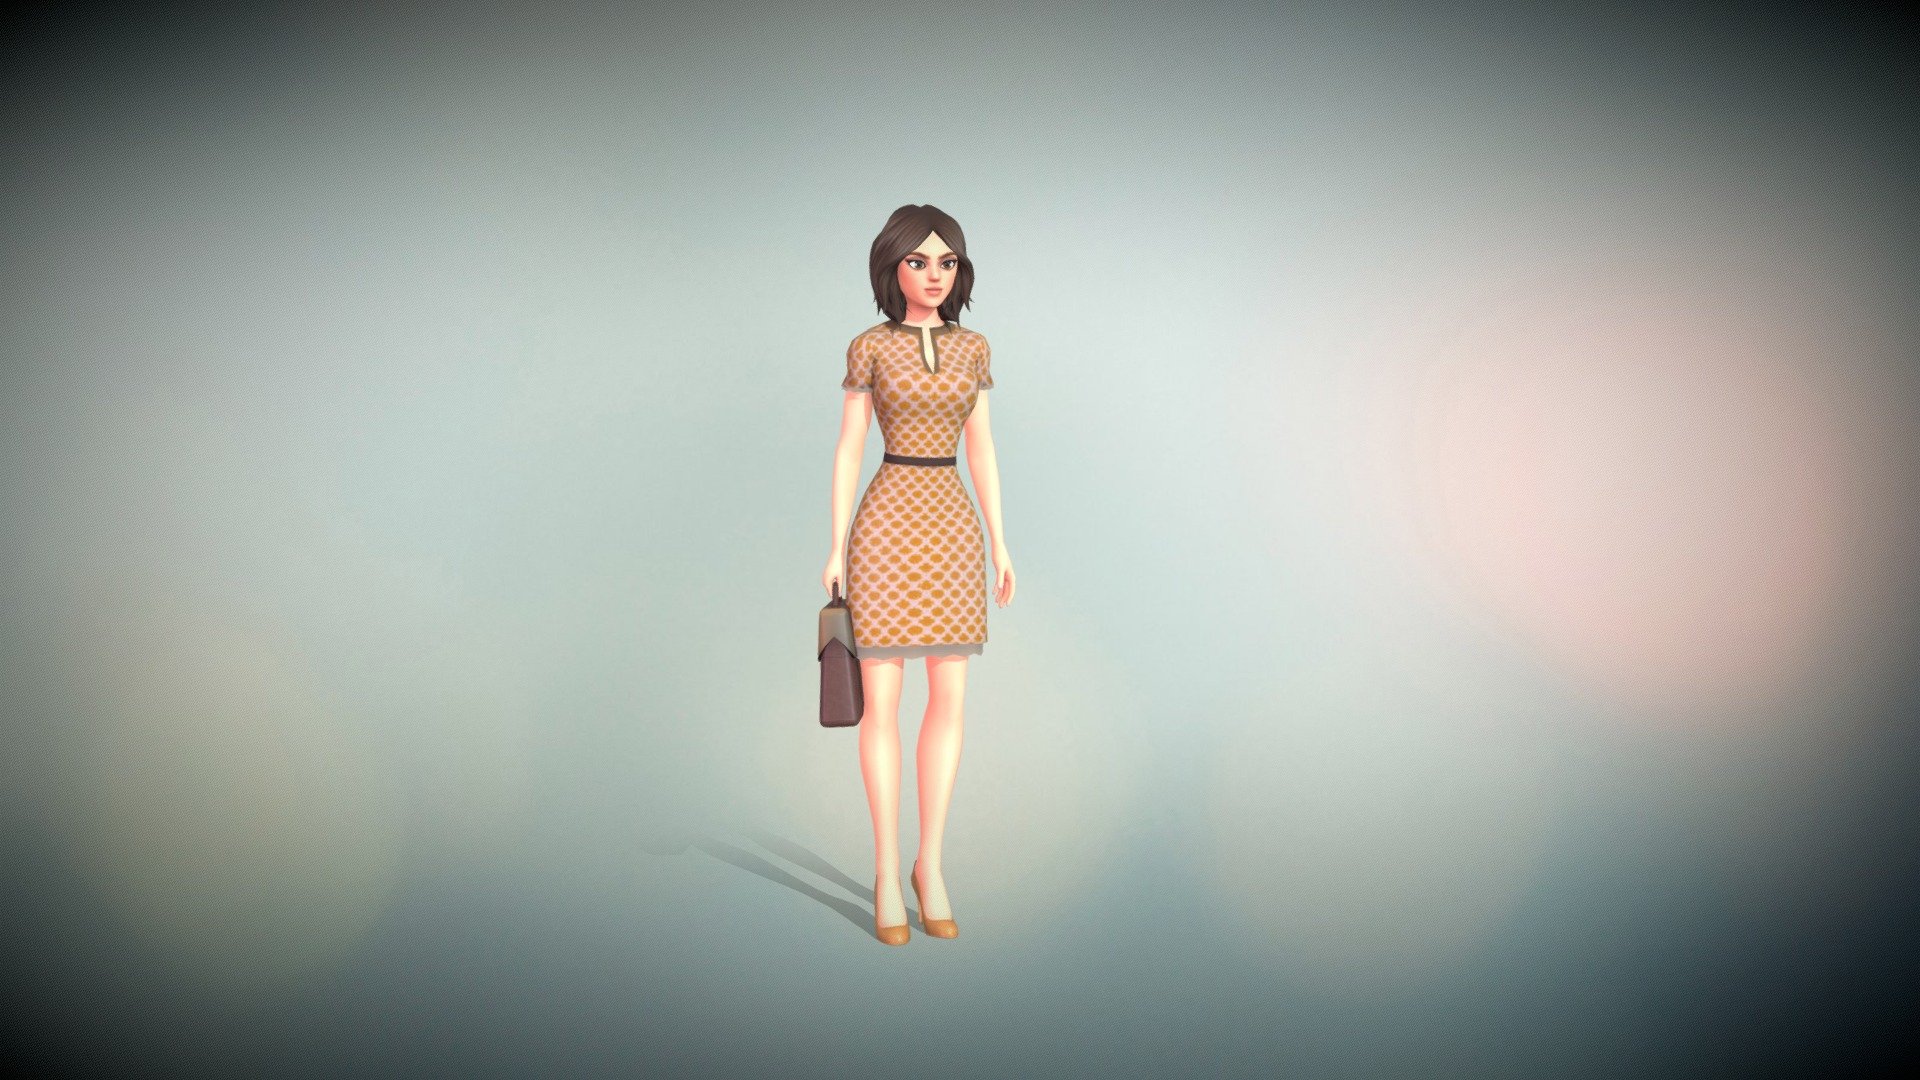 Abigail is a character from my Utlimate Stylized Business Women pack. The pack, available on the Unity Asset Store, features a selection of mecanim-compatible, stylized female characters that will make any business, office or casual game more vibrant. No animations included. (Shown here with a Mixamo animation.)

Contents:




3 characters

5 hairstyles

6 outfits

Features:




Facial blendshapes

Hairstyles rigged for physics assets or animation

2048 x 2048 Textures

~15K tris depending on mesh

Bonus: office props!

Material Options:




Outfit 1 Blouse: 16 materials

Outfit 1 Skirt: 8 materials

Outfit 2 Tank Top: 16 materials

Outfit 2 Pants: 5 materials

Outfit 3 Suit: 5 materials

Outfit 4 Dress: 22 materials

Outfit 5 Jacket: 5 materials

Outfit 5 Pants: 5 materials

Outfit 5 Boots: 3 materials

Outfit 6 Dress: 11 materials

High Heels: 8 materials

Makeup Skin: 3 materials

Eyes: 9 materials

Hair: 7 materials (ea)
 - Abigail - Ultimate Stylized Business Women pack - 3D model by stellargameassets 3d model